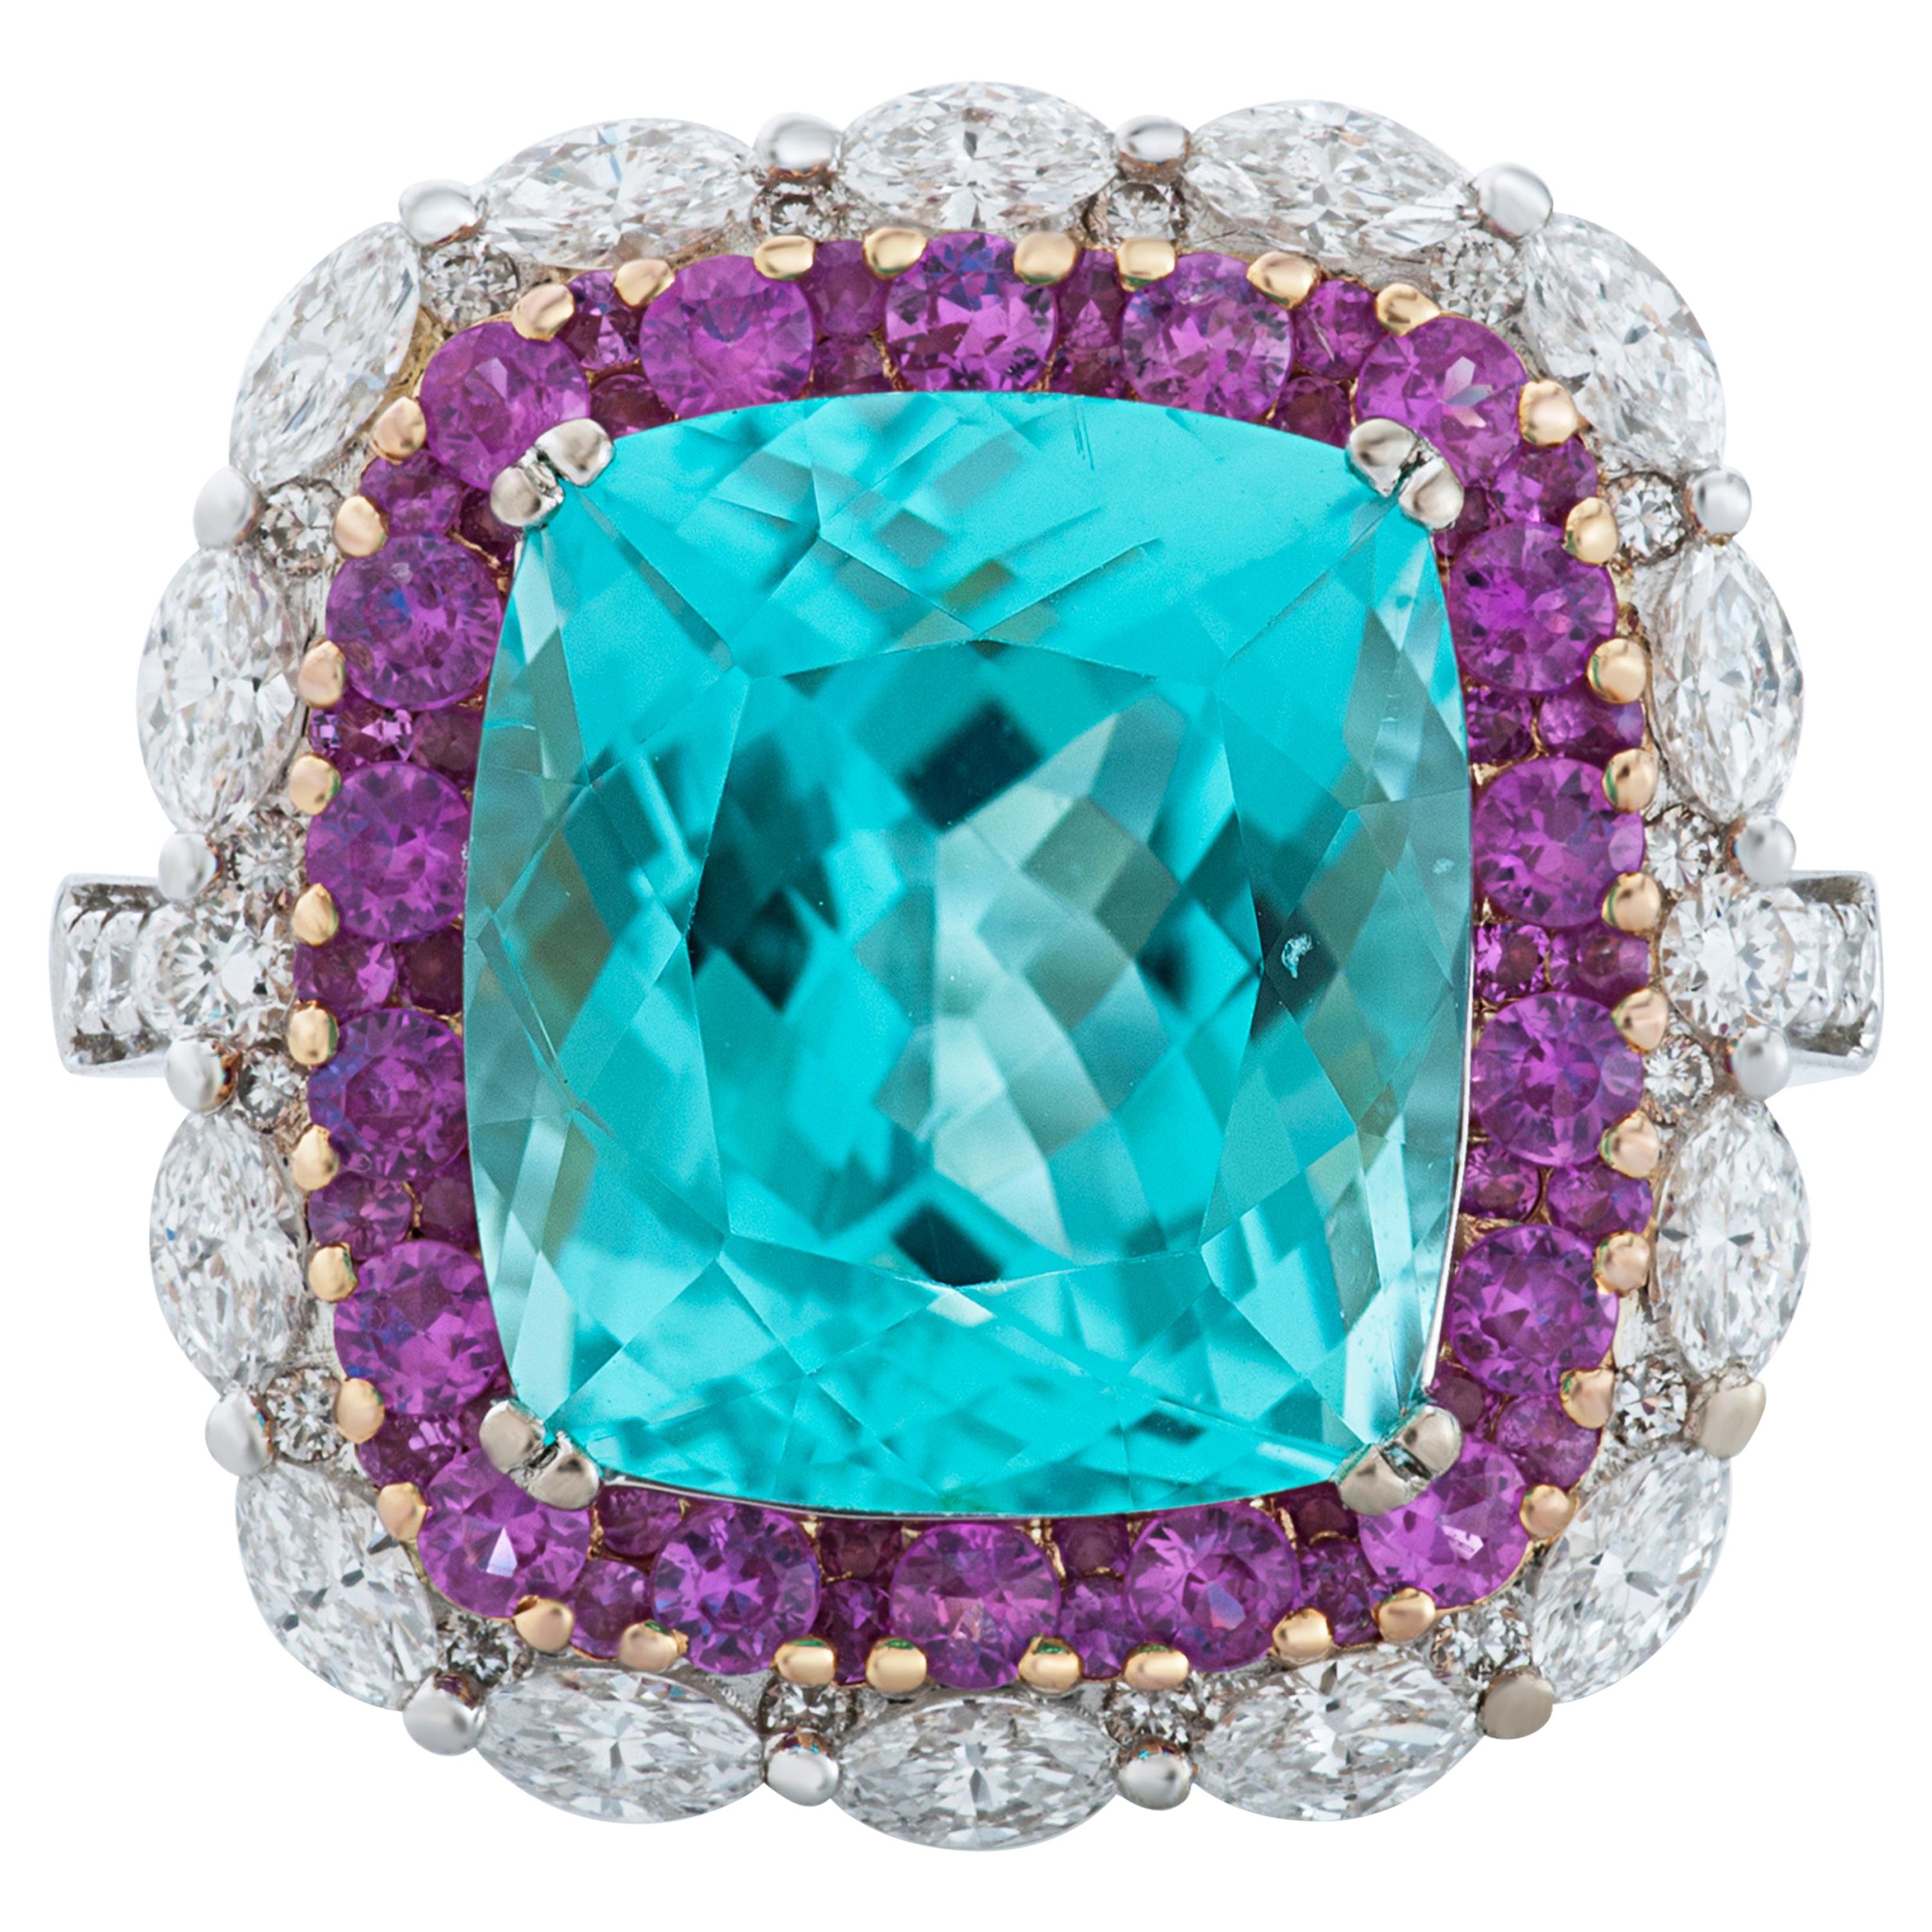 Gregg Ruth Paraiba Tourmaline Ring with Diamonds and Pink Sapphires in 18k Gold